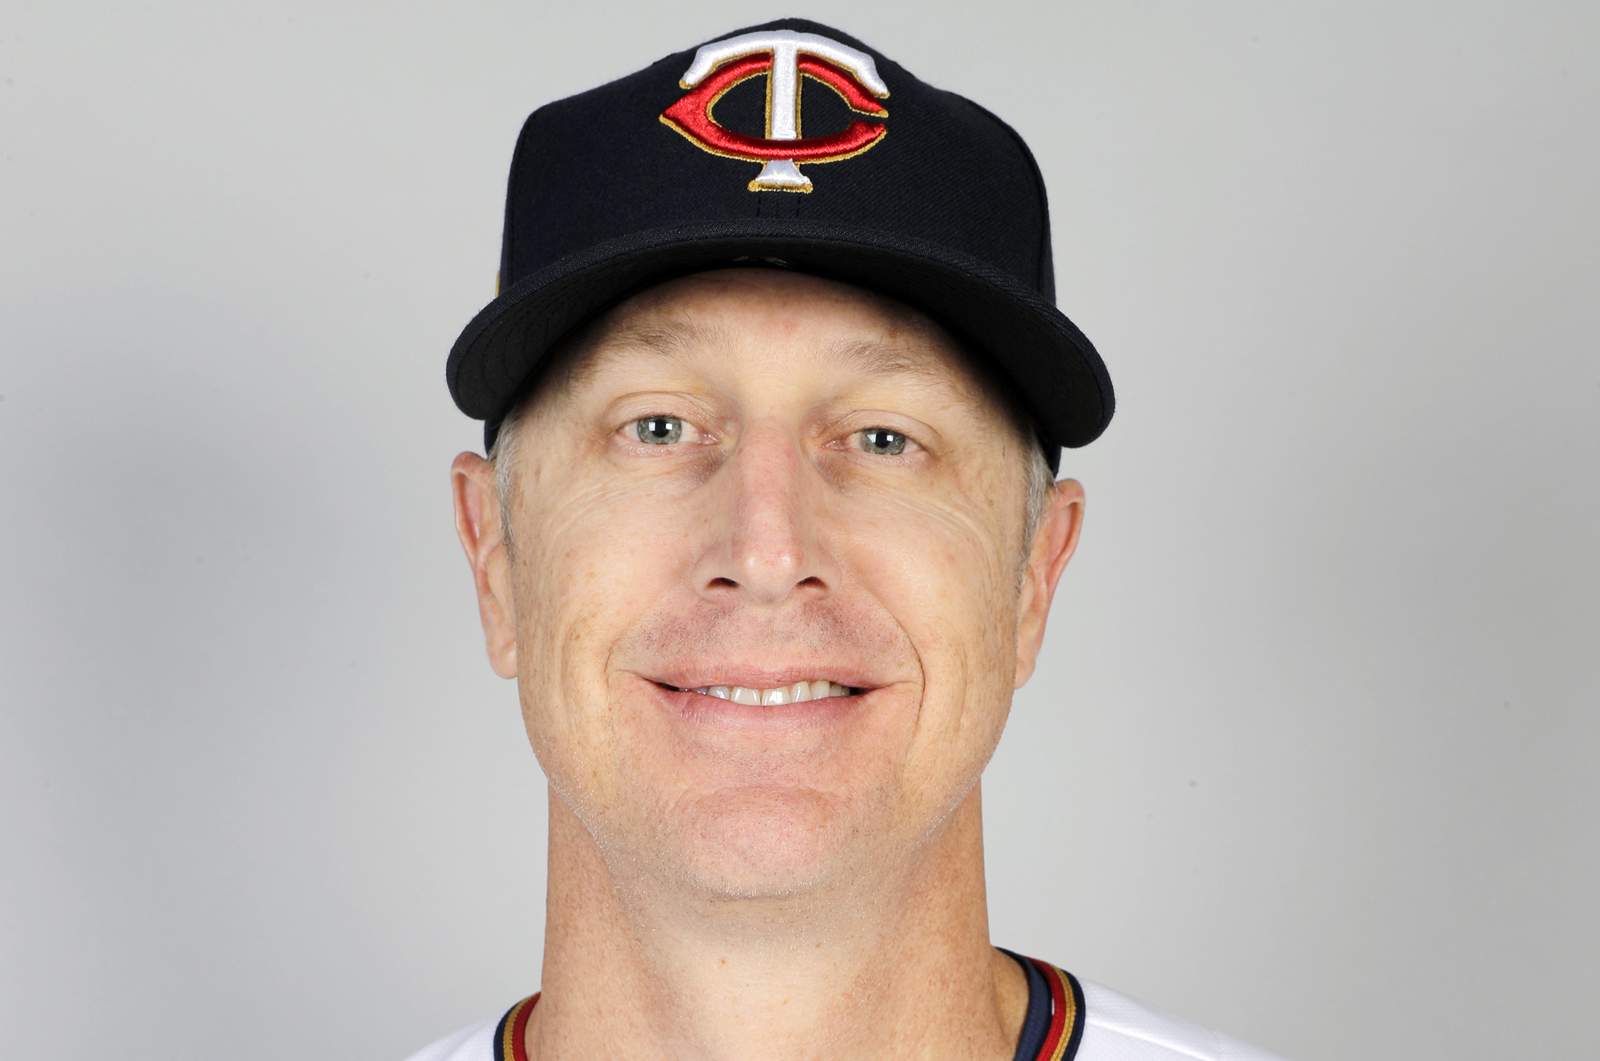 Twins coach Mike Bell, brother of Reds manager, dies at 46